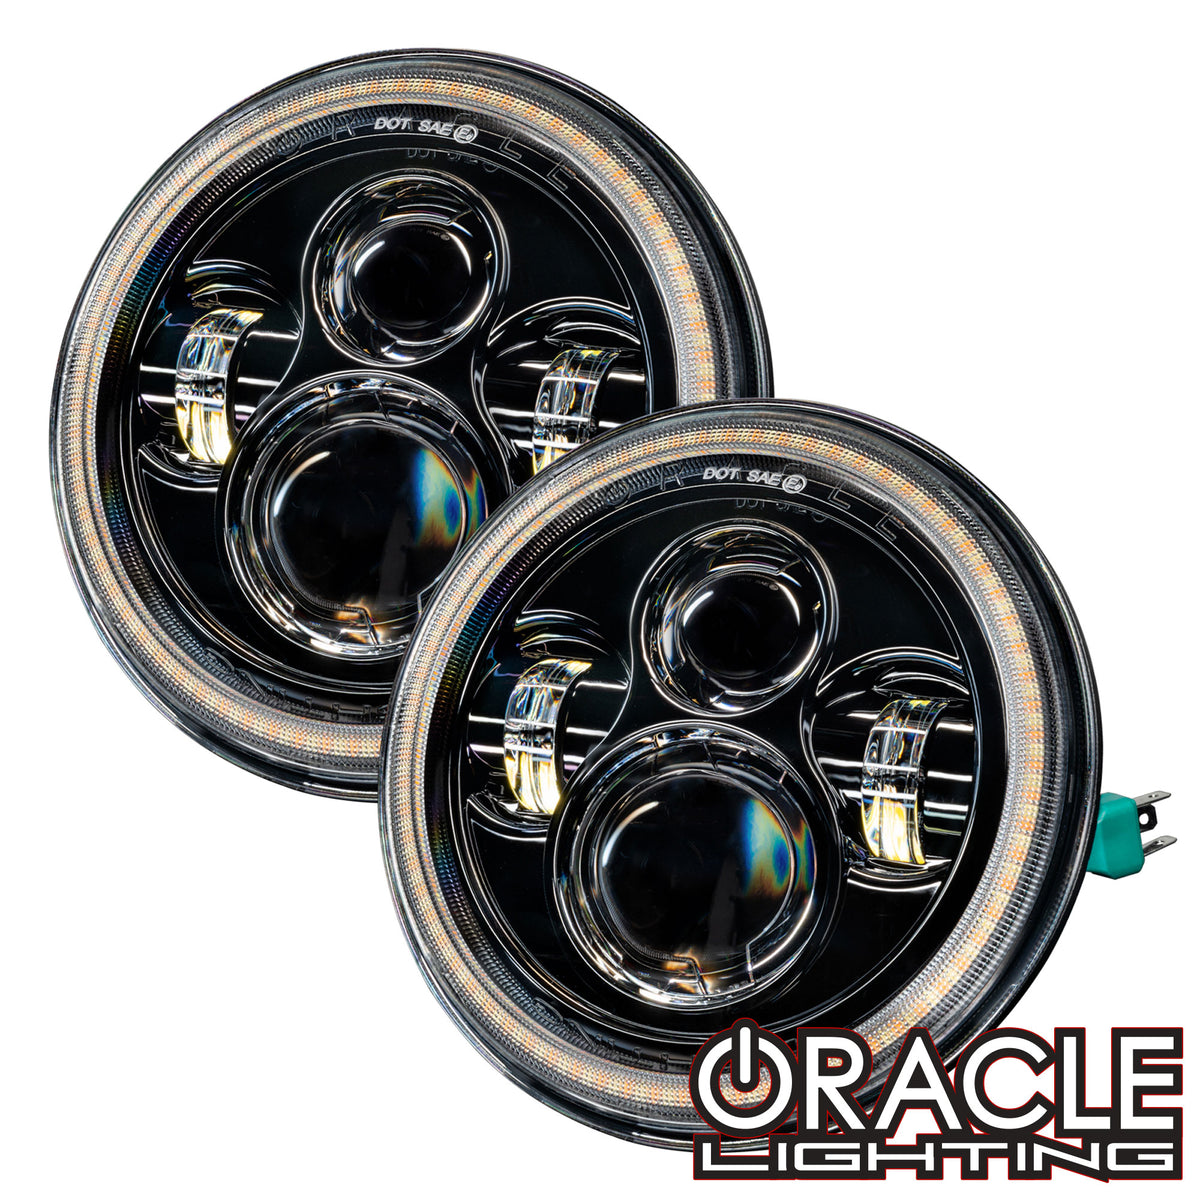 Adapter for CAN BUS System Suitable for 7 LED Headlights, £ 18.22